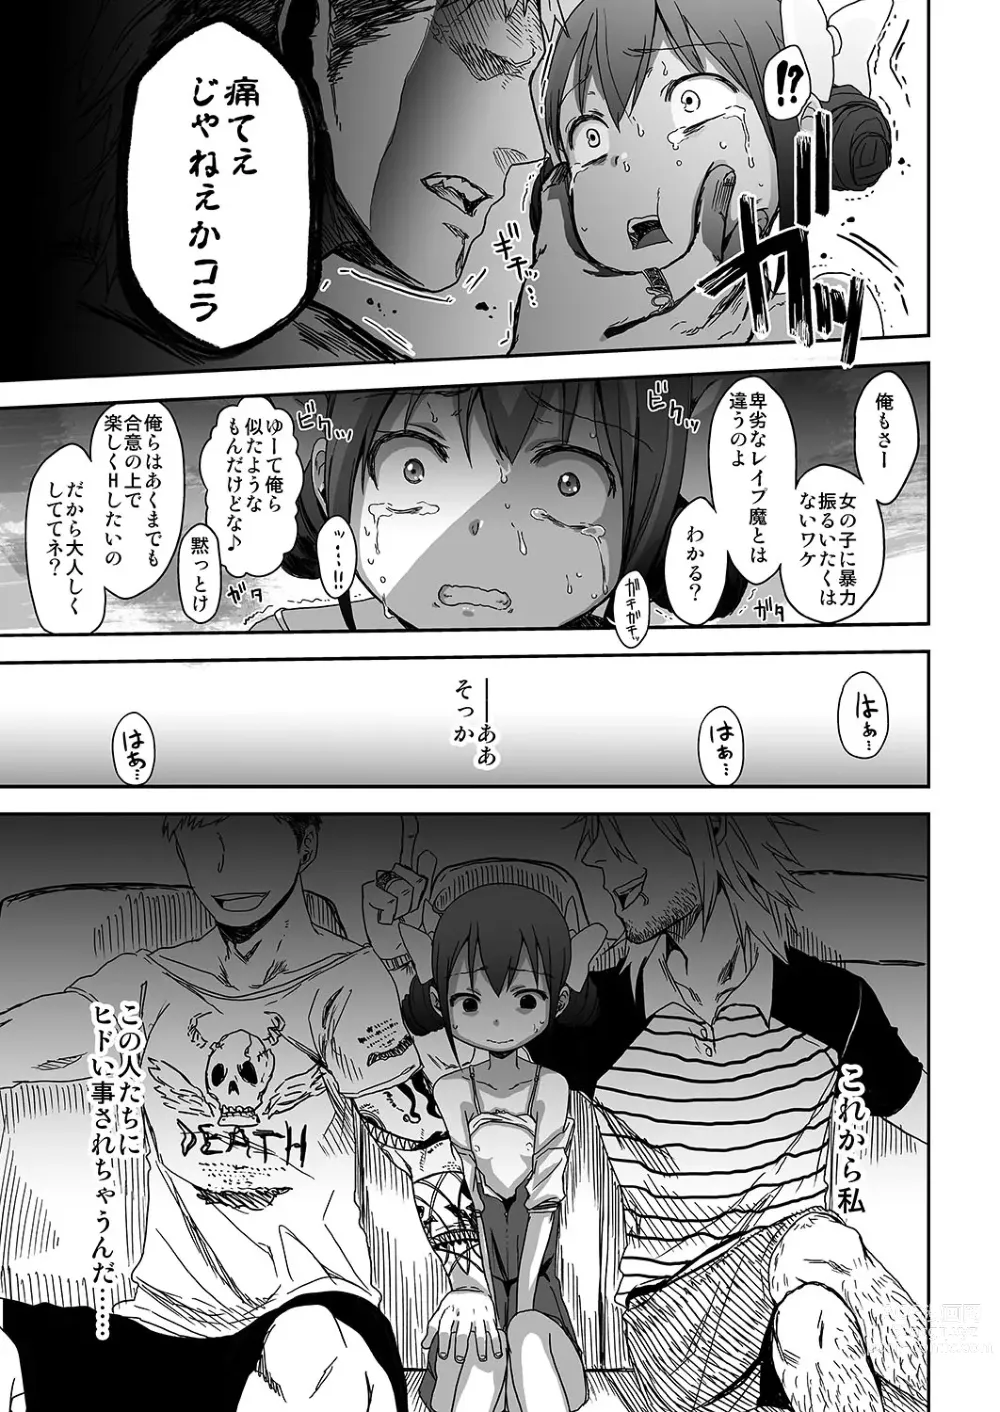 Page 7 of imageset 荒草まほん(476409)【Deleted】